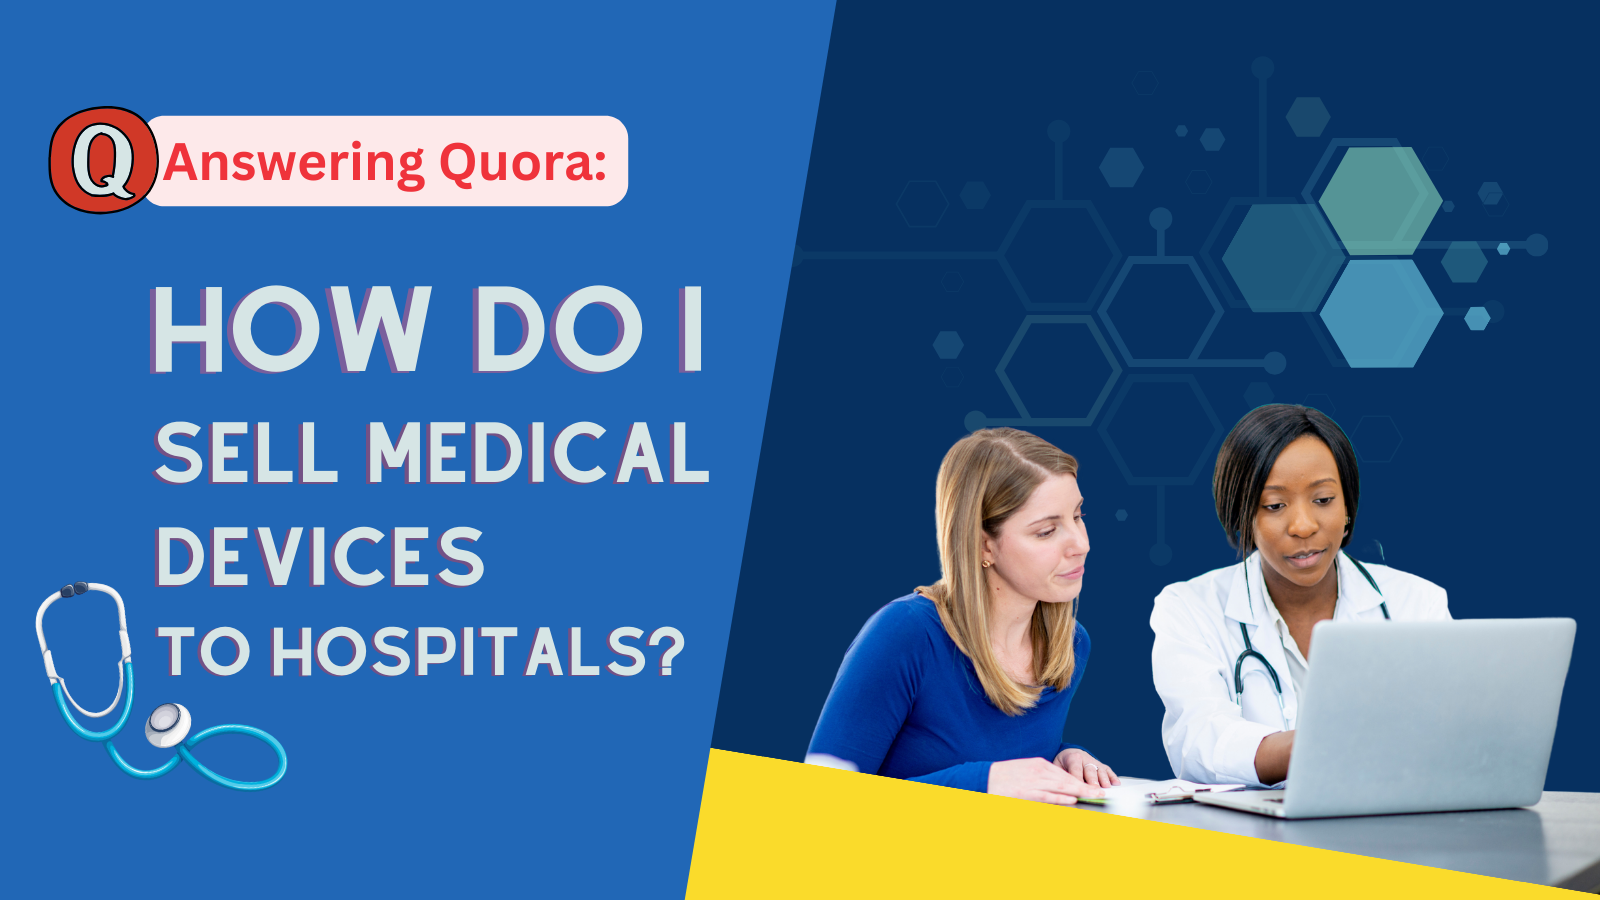 Answering Quora How do I sell medical devices to hospitals - Callbox